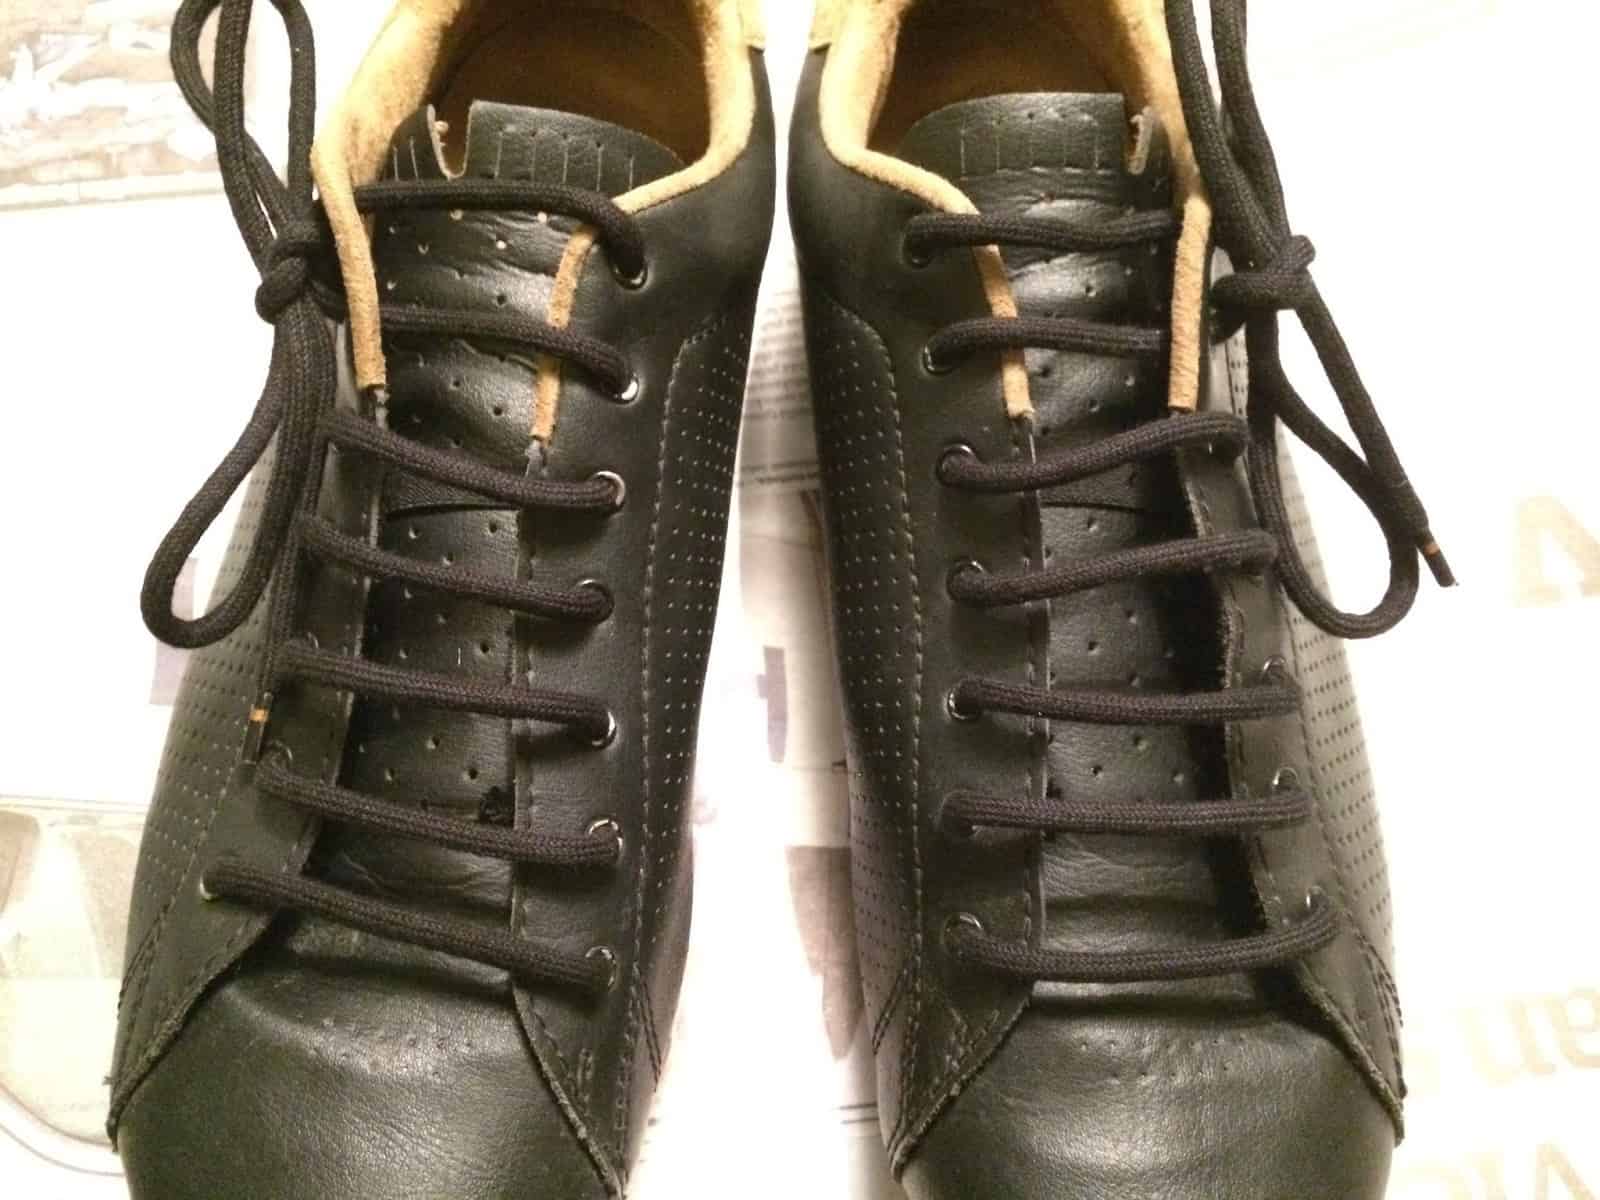 How to Lace Converse High Tops?